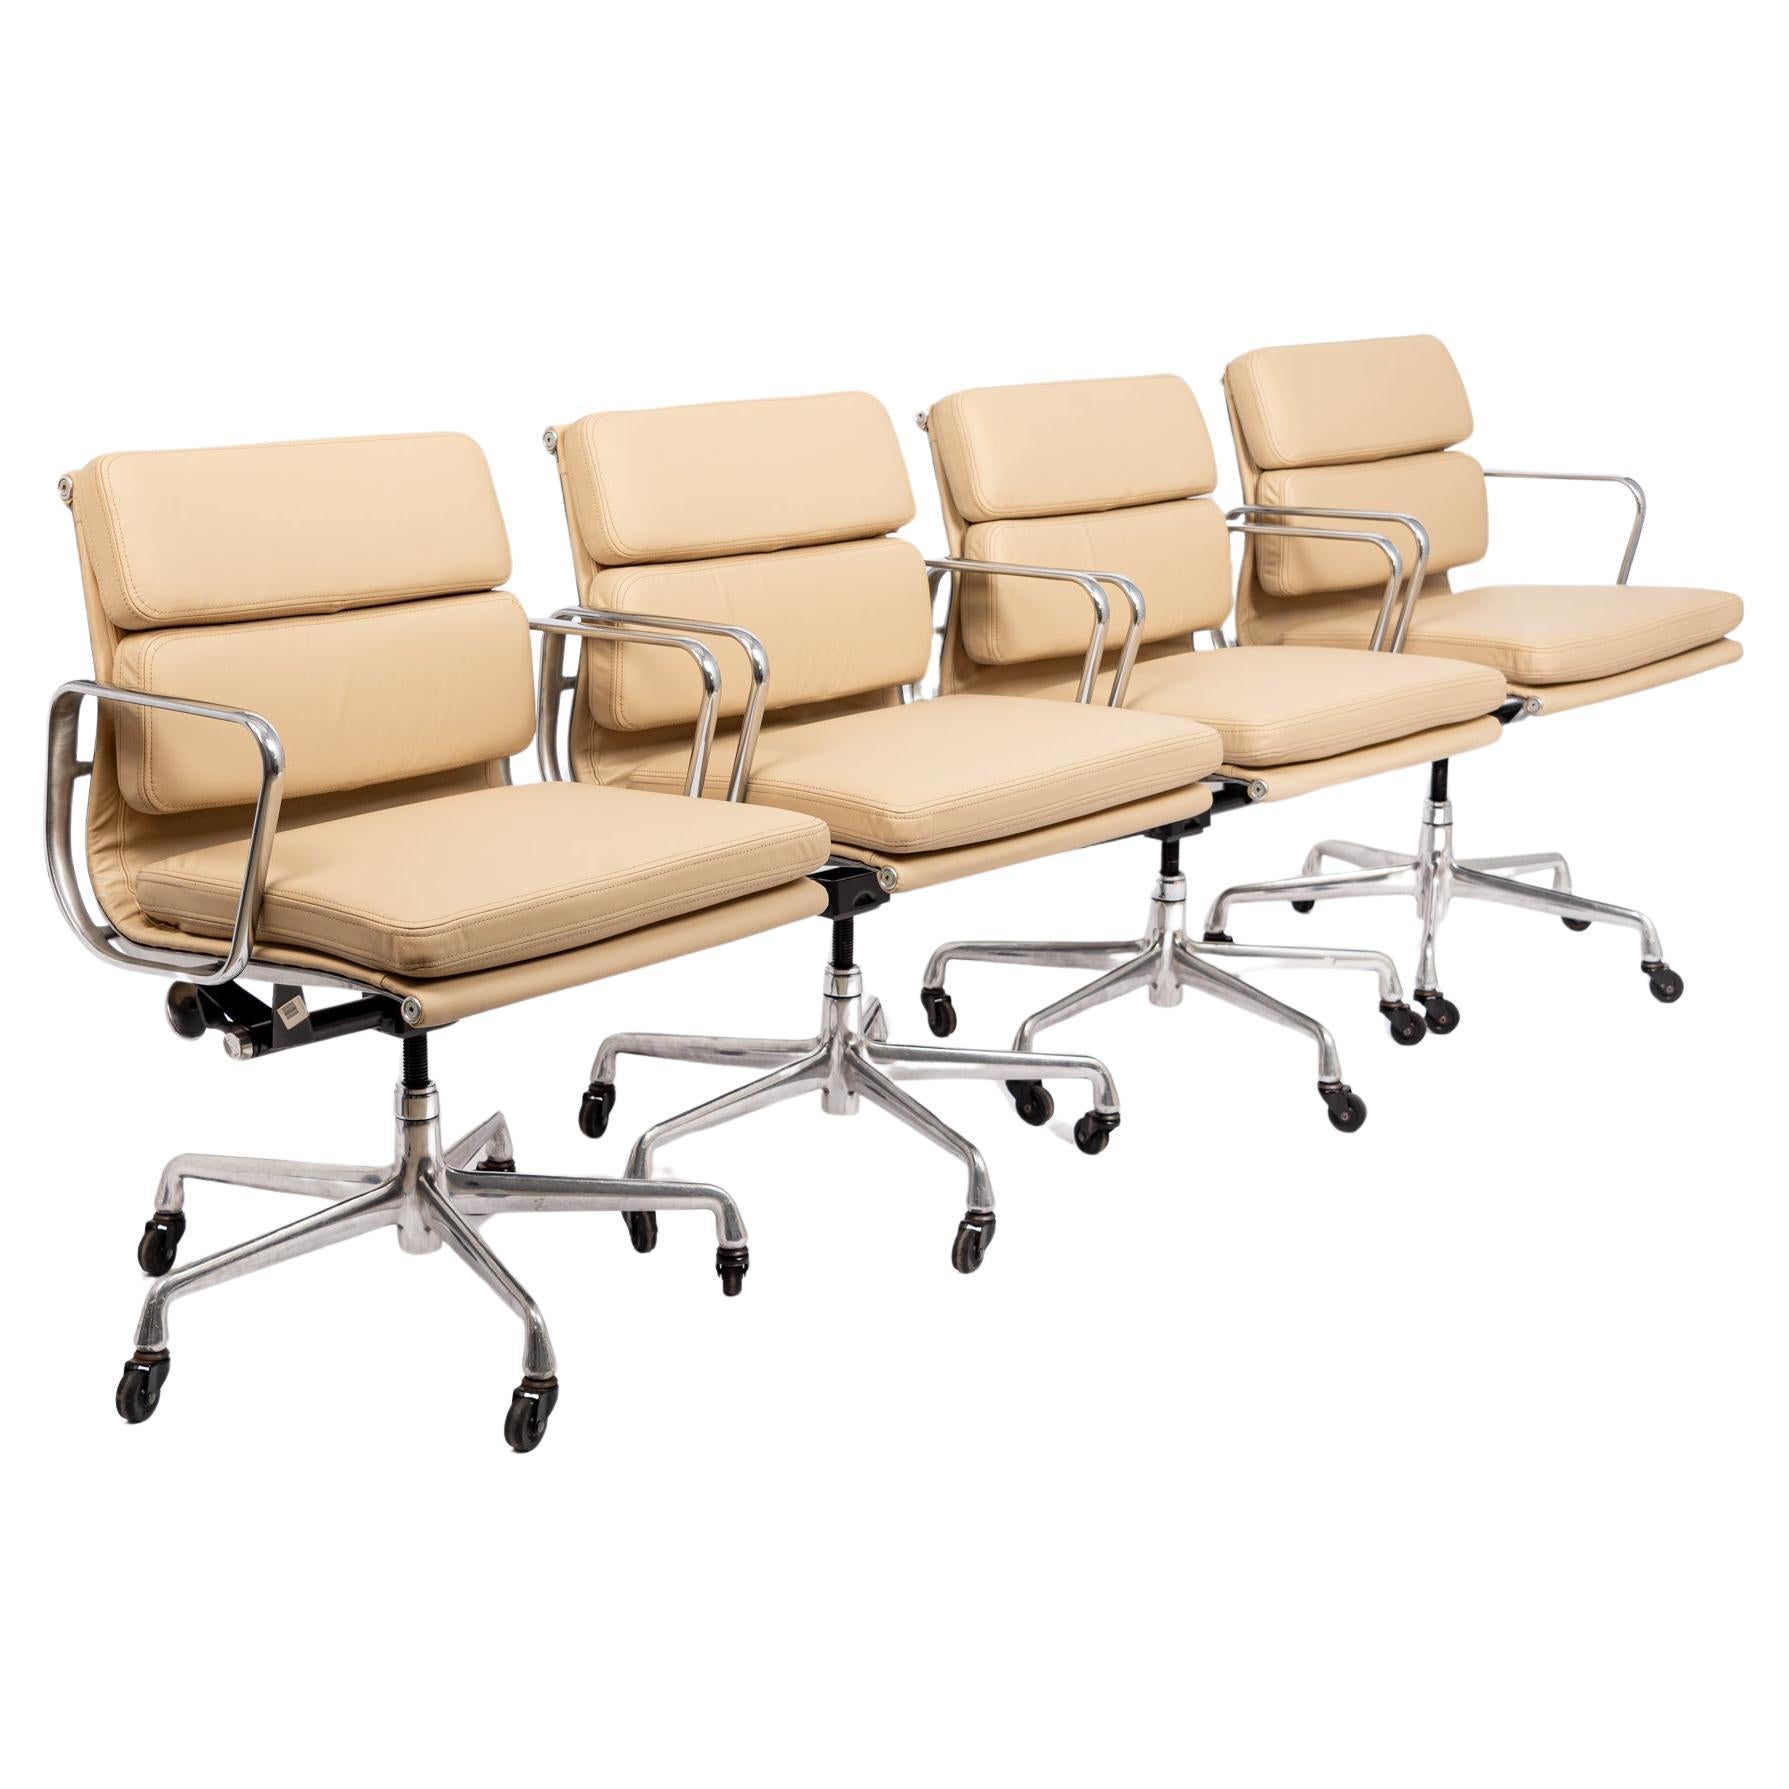 Listing is for 6 chairs.

These authentic Eames for Herman Miller Soft Pad Management Height cream leather office chairs from the Aluminum Group Collection were manufactured in the 2000s. This classic mid century modern office chair was first